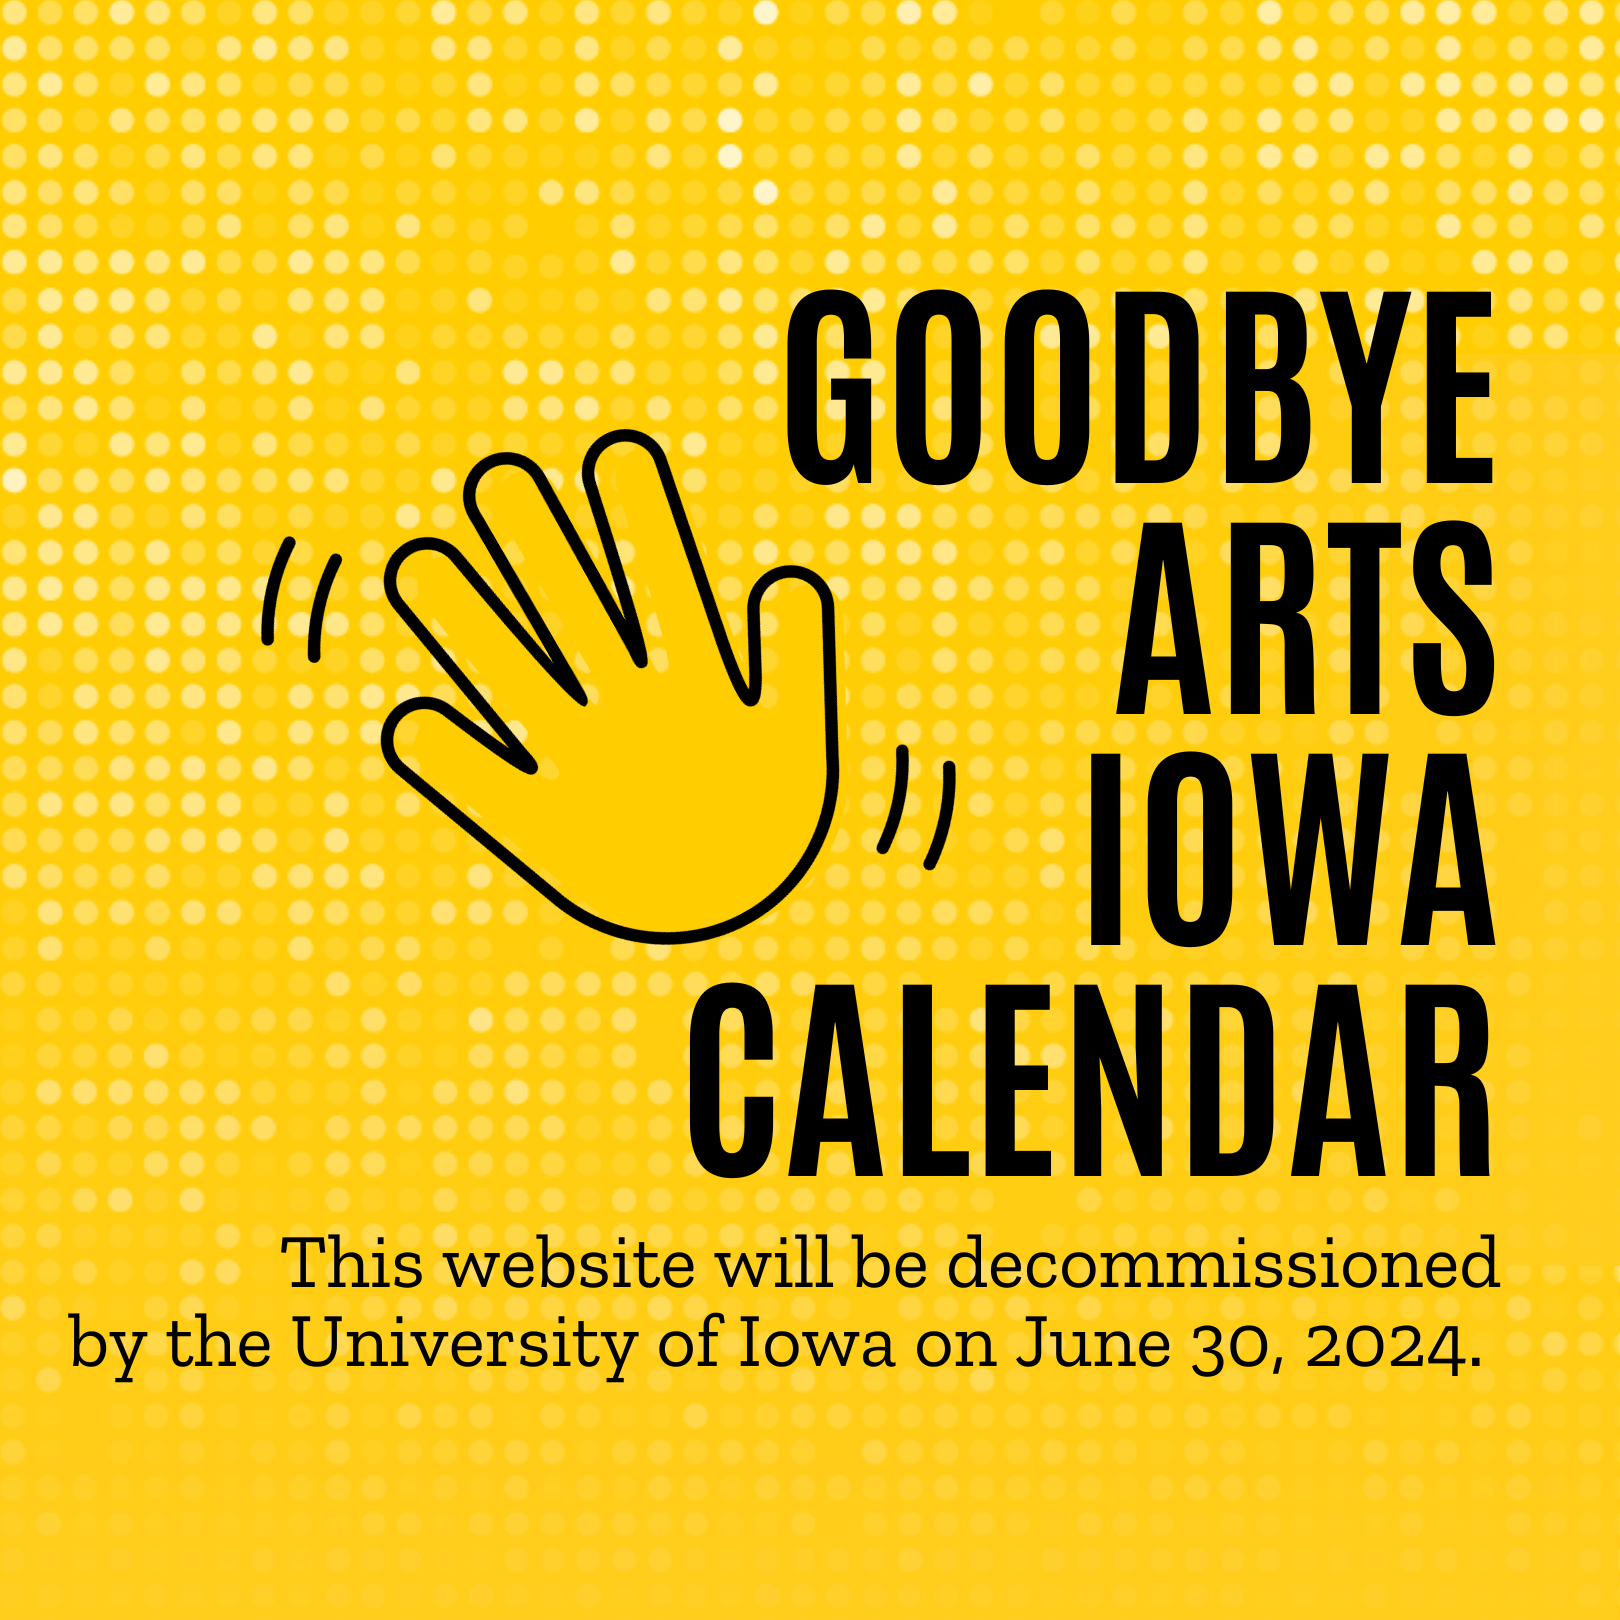 the Arts Iowa calendar website will be decommissioned on June 30, 2024.